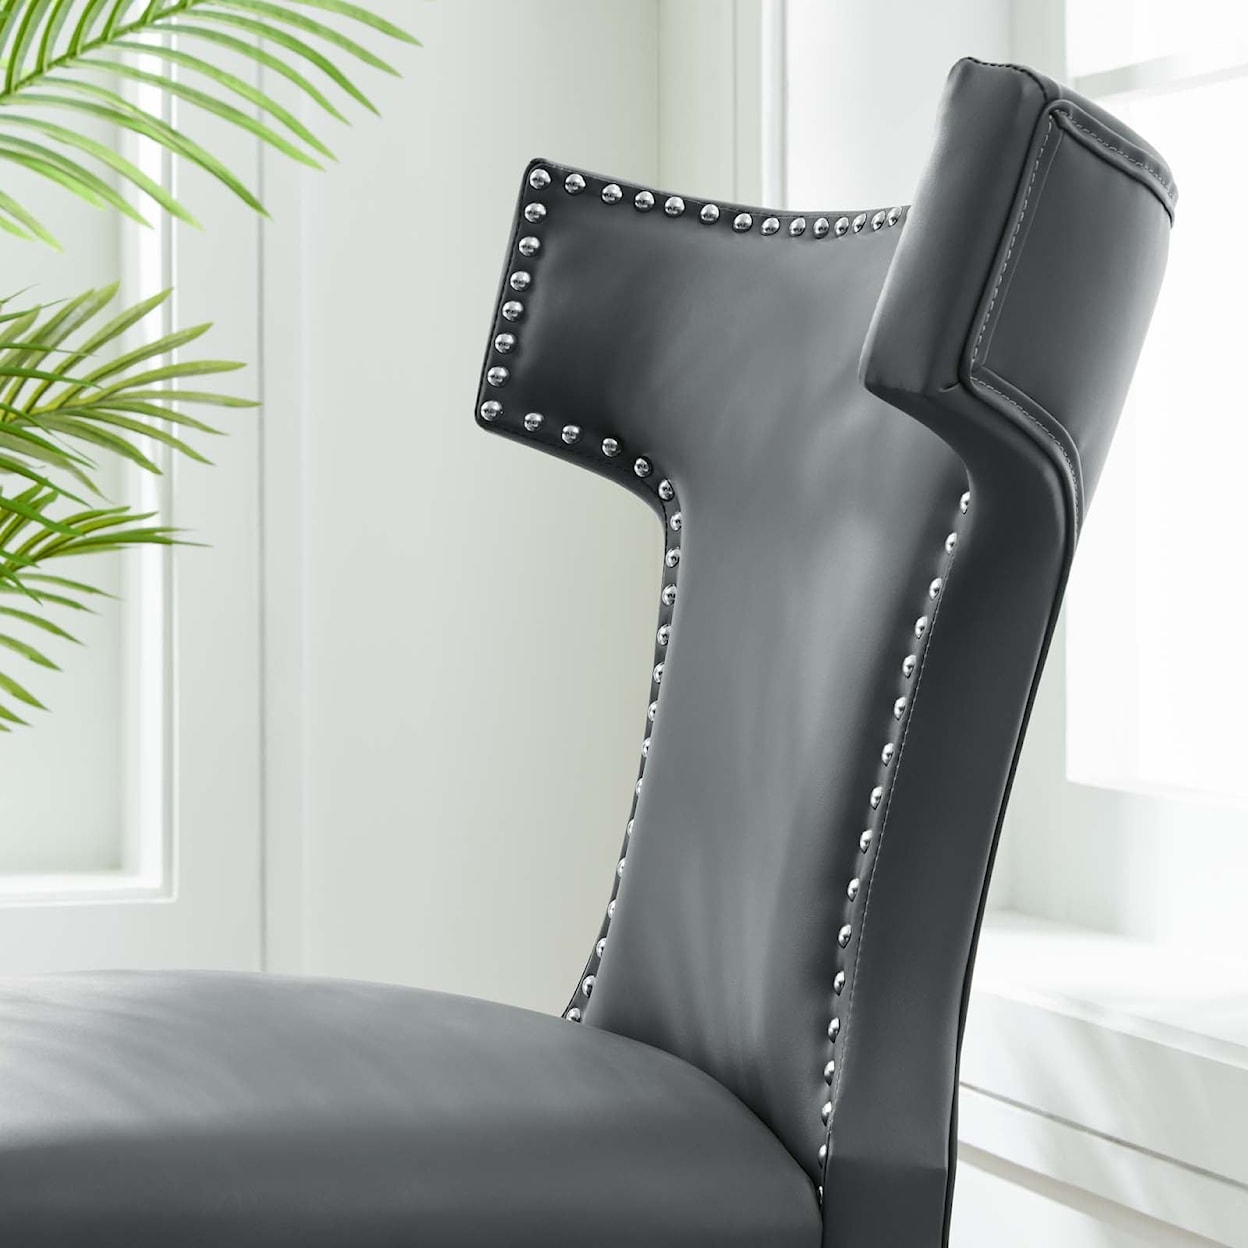 Modway Curve Curve Dining Chair